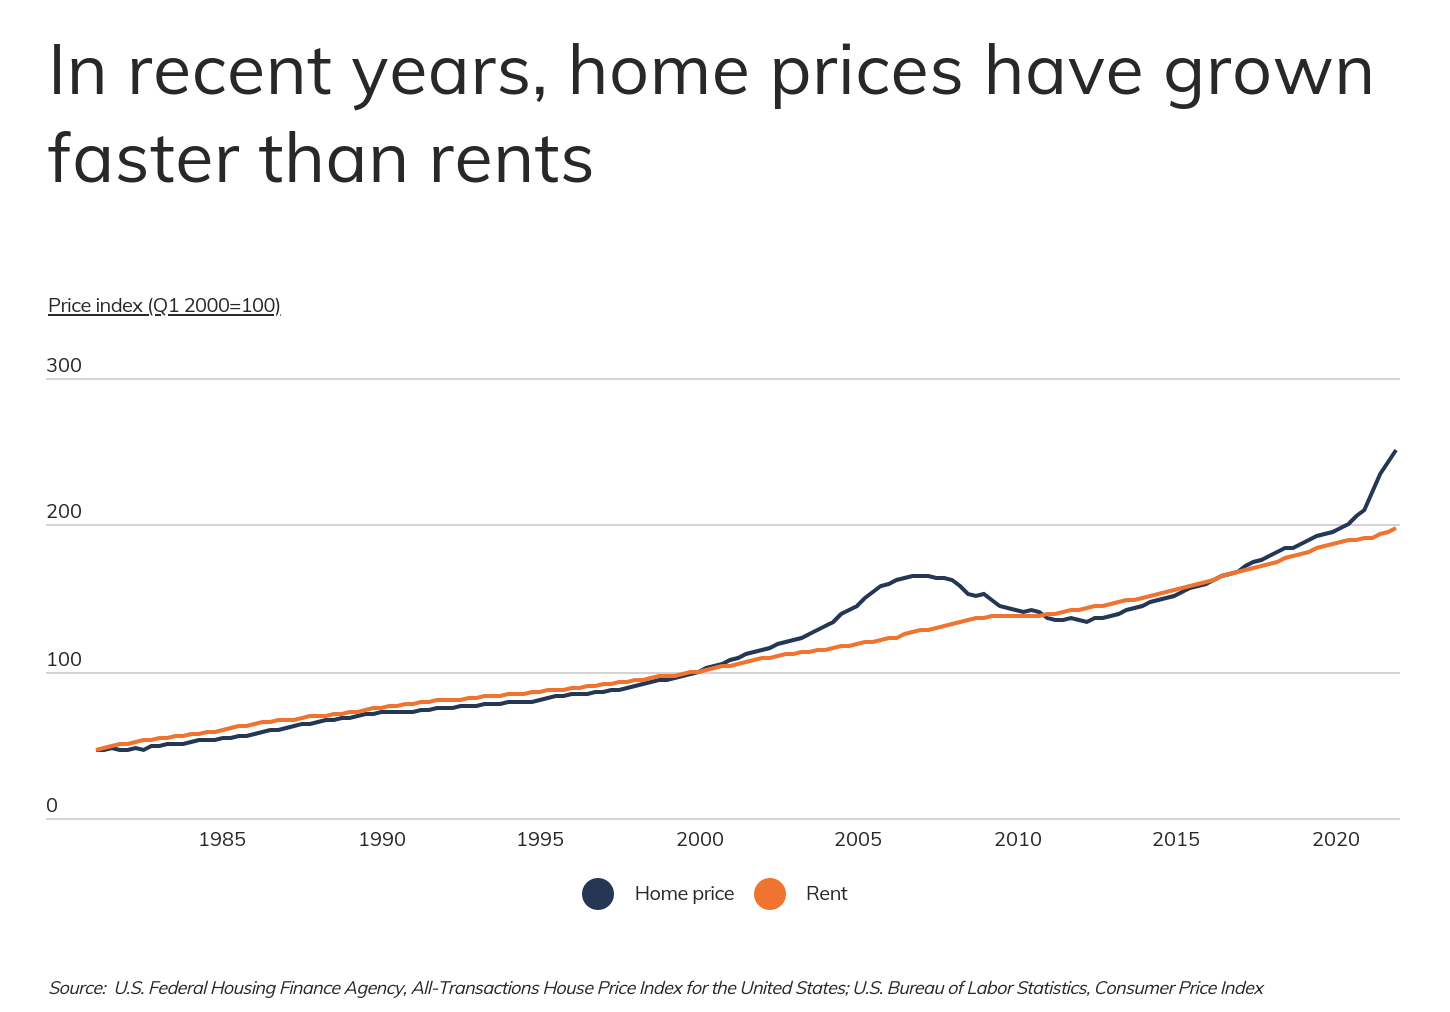 Chart1_Home prices have grown faster than rents in recent years